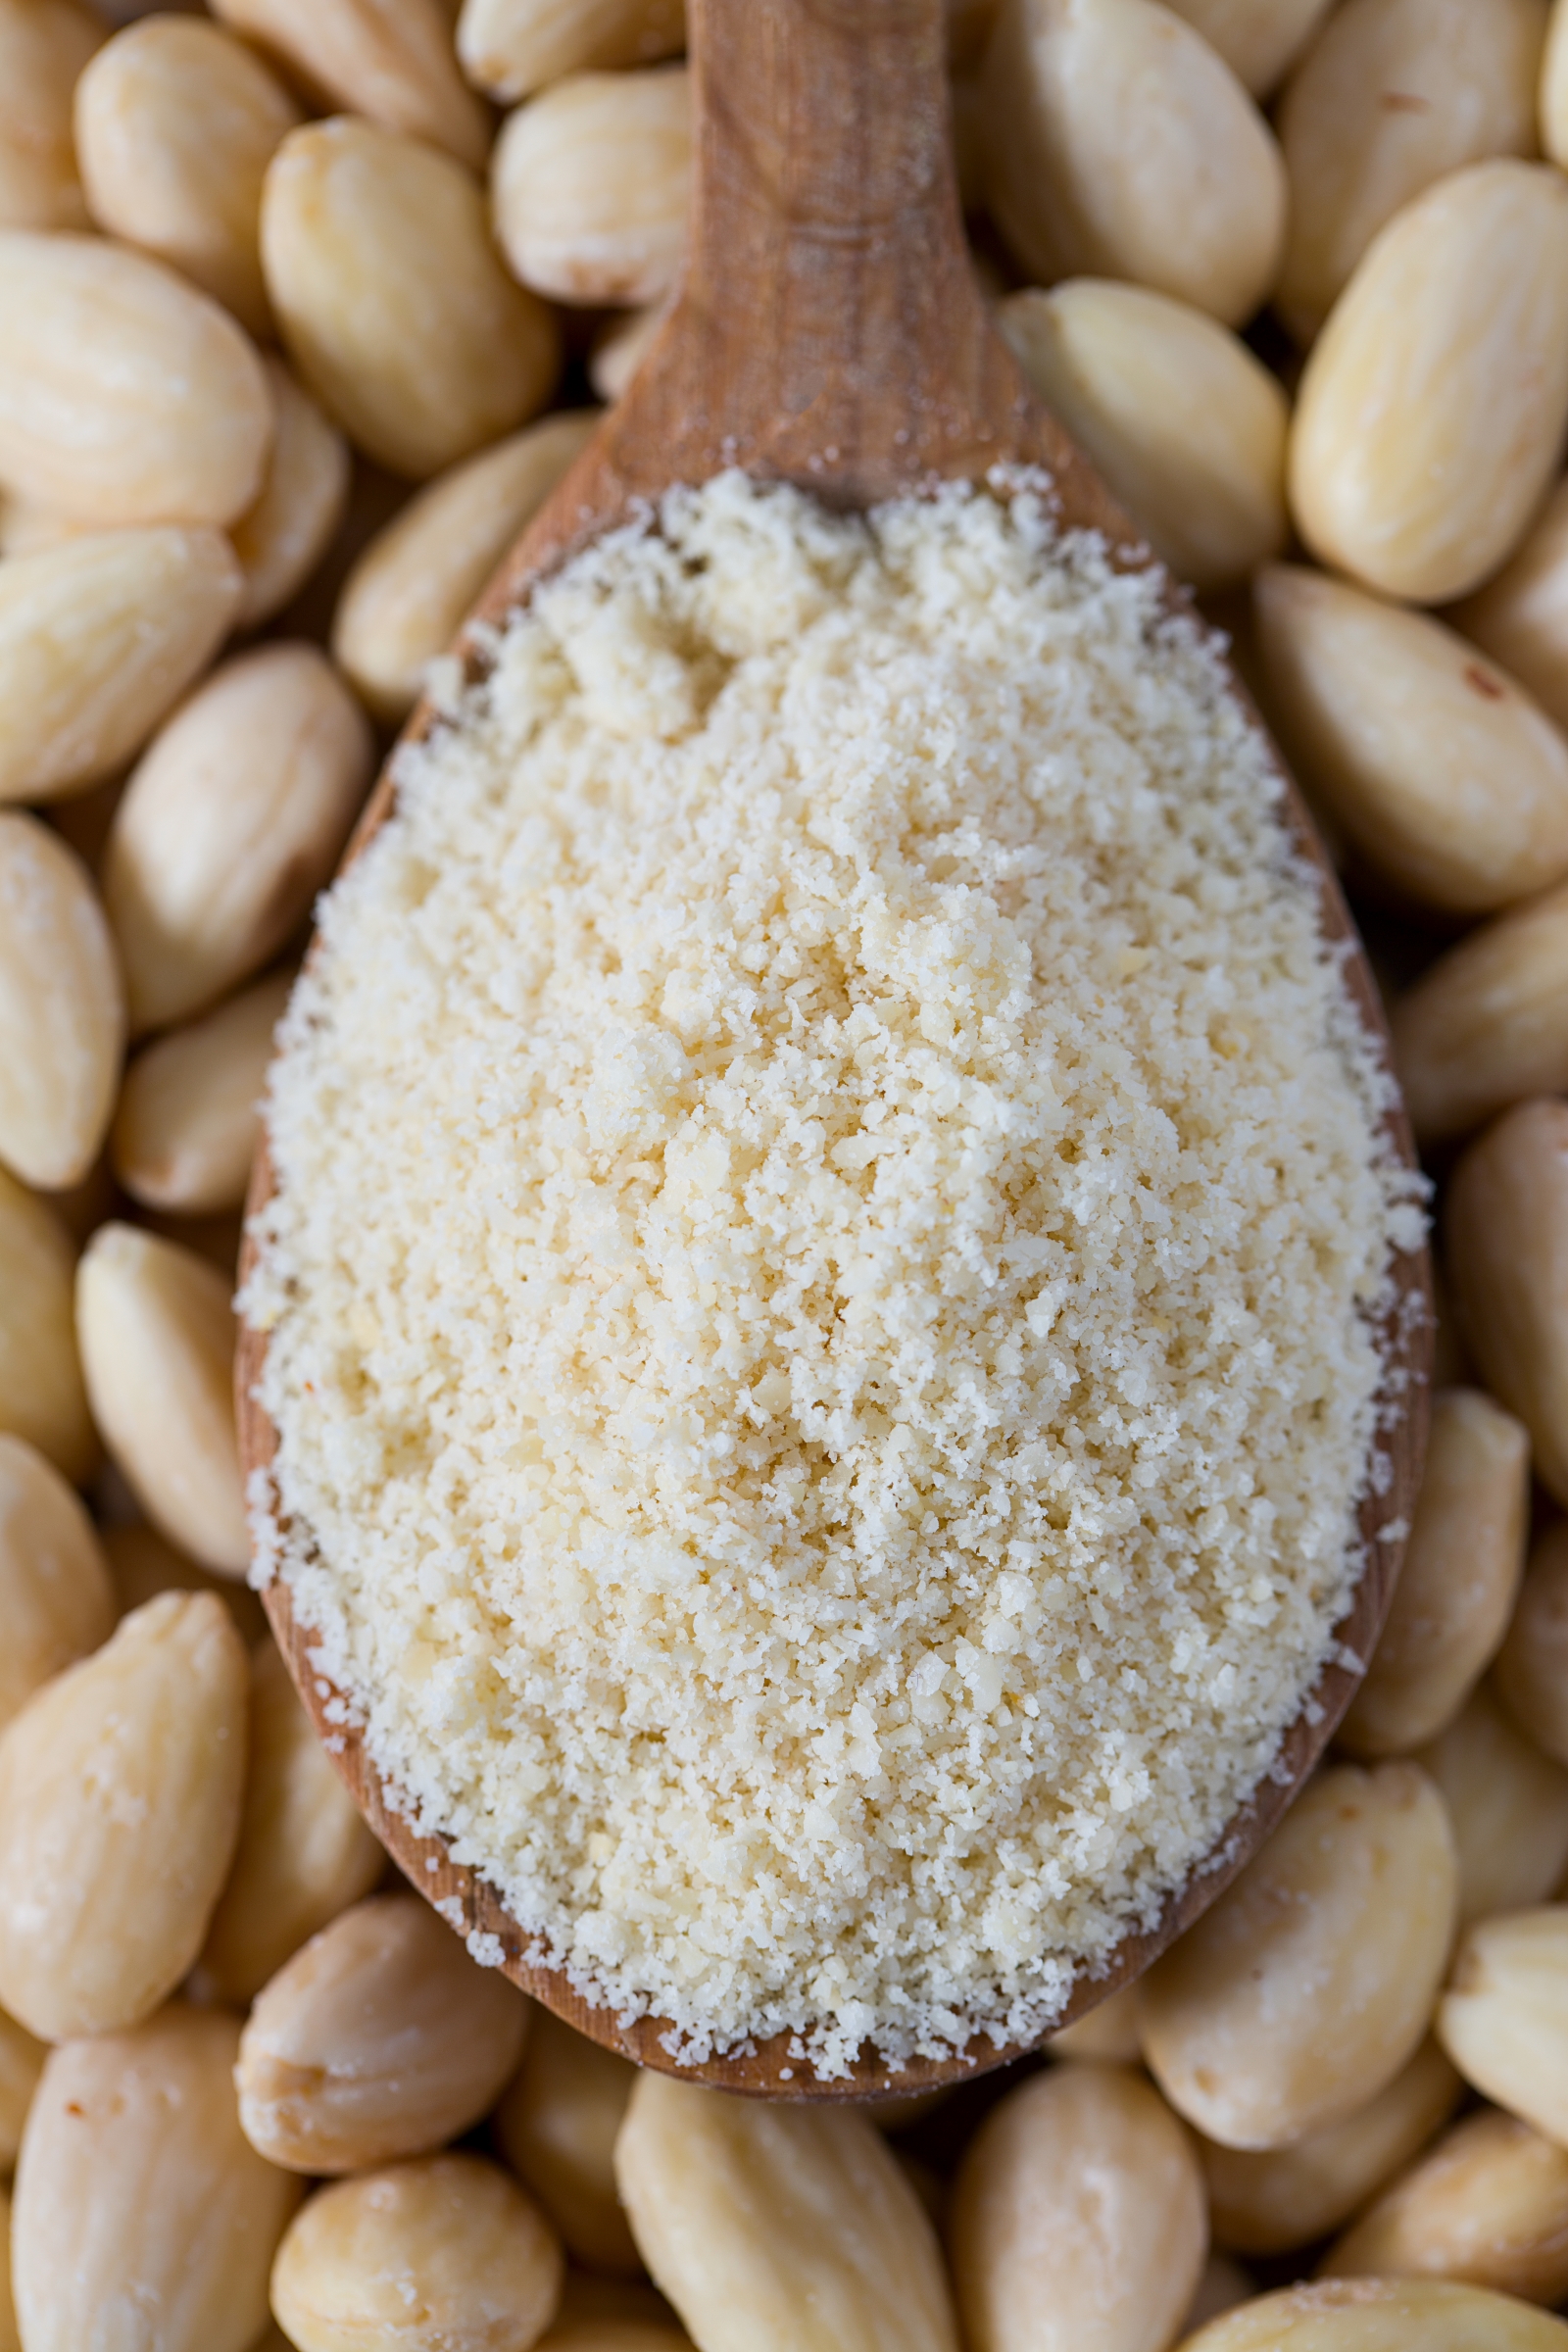 Does Almond Flour Go Bad? 4 Ways to Check!